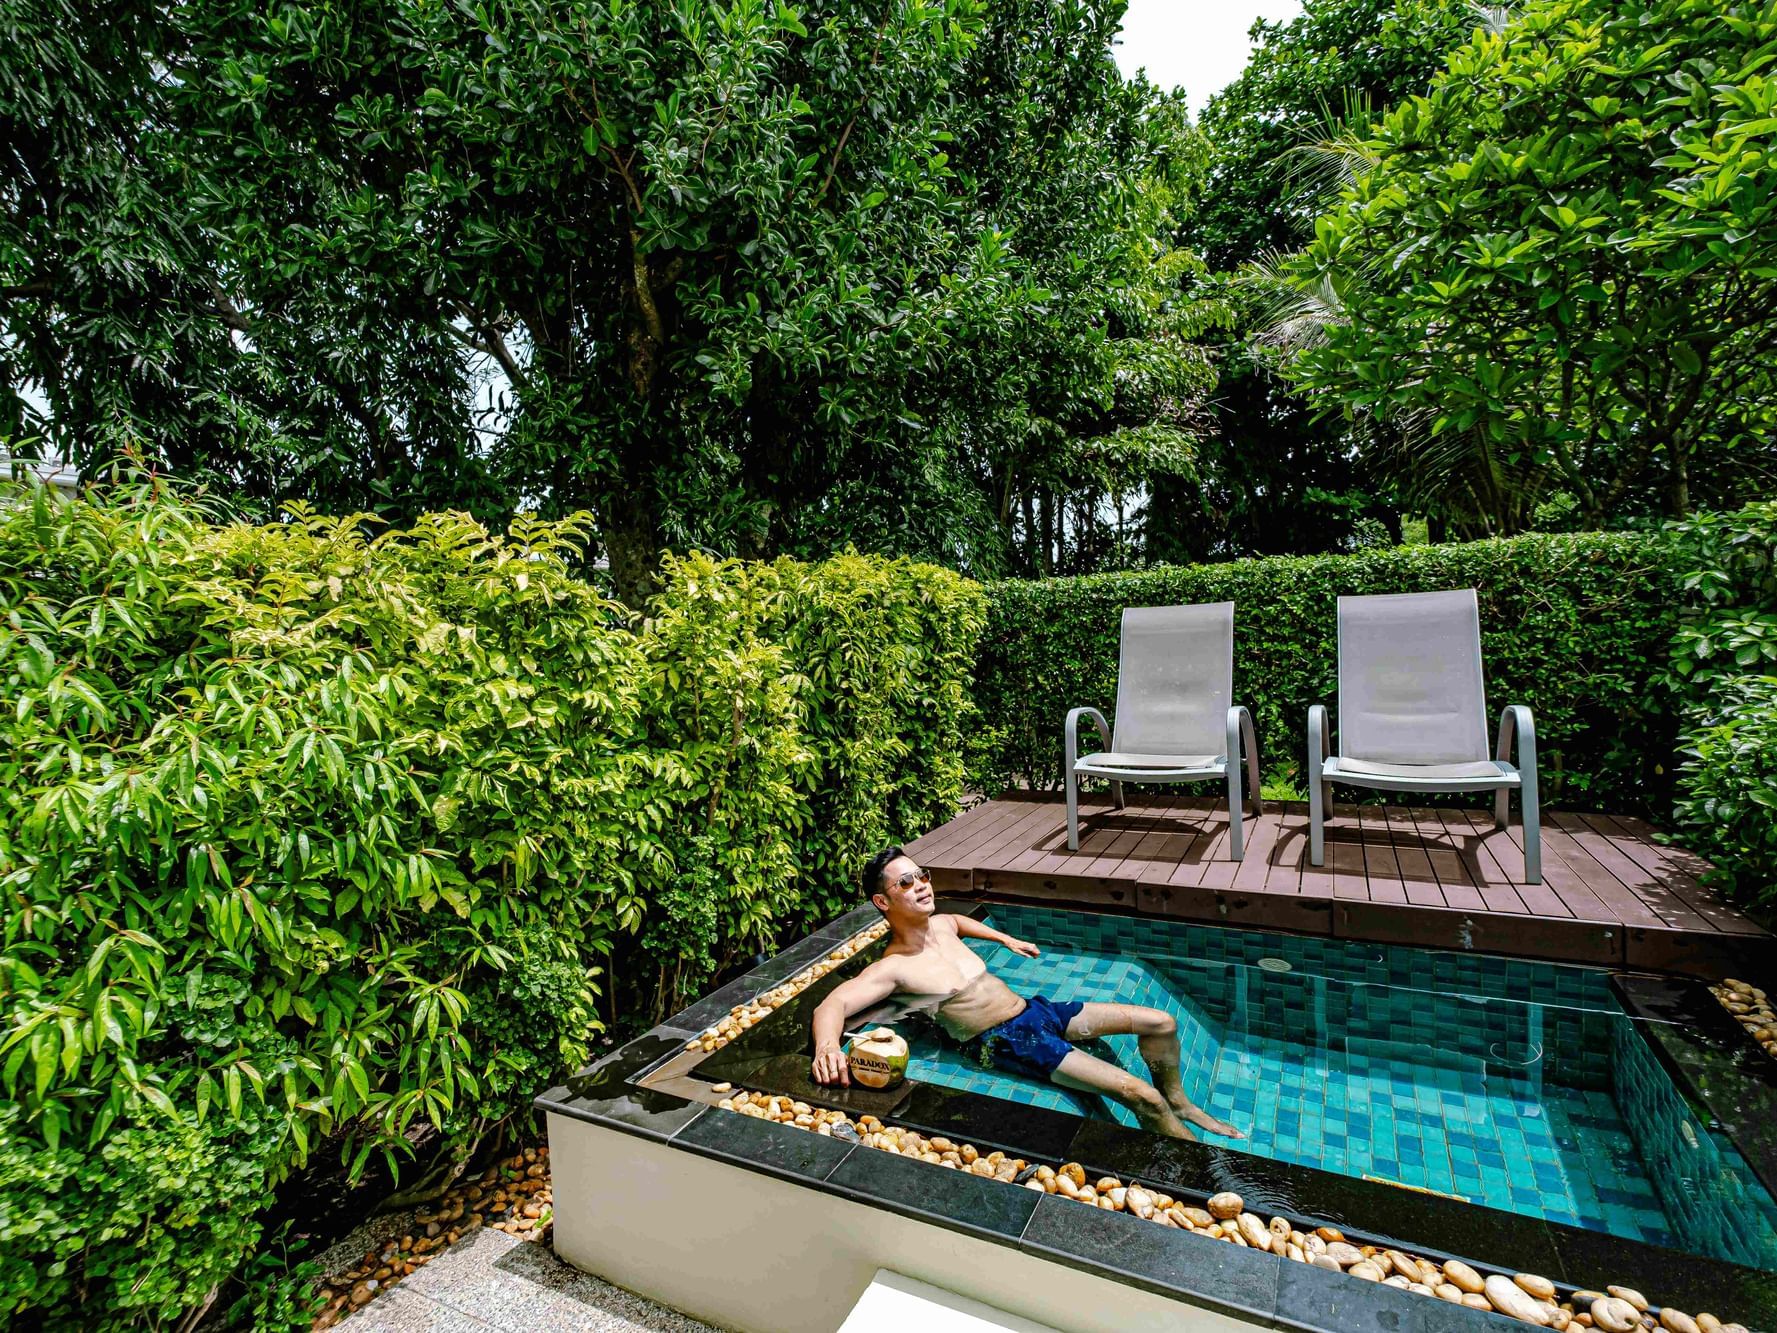 A man is soaking the good vibes in the Plunge Pool with garden view